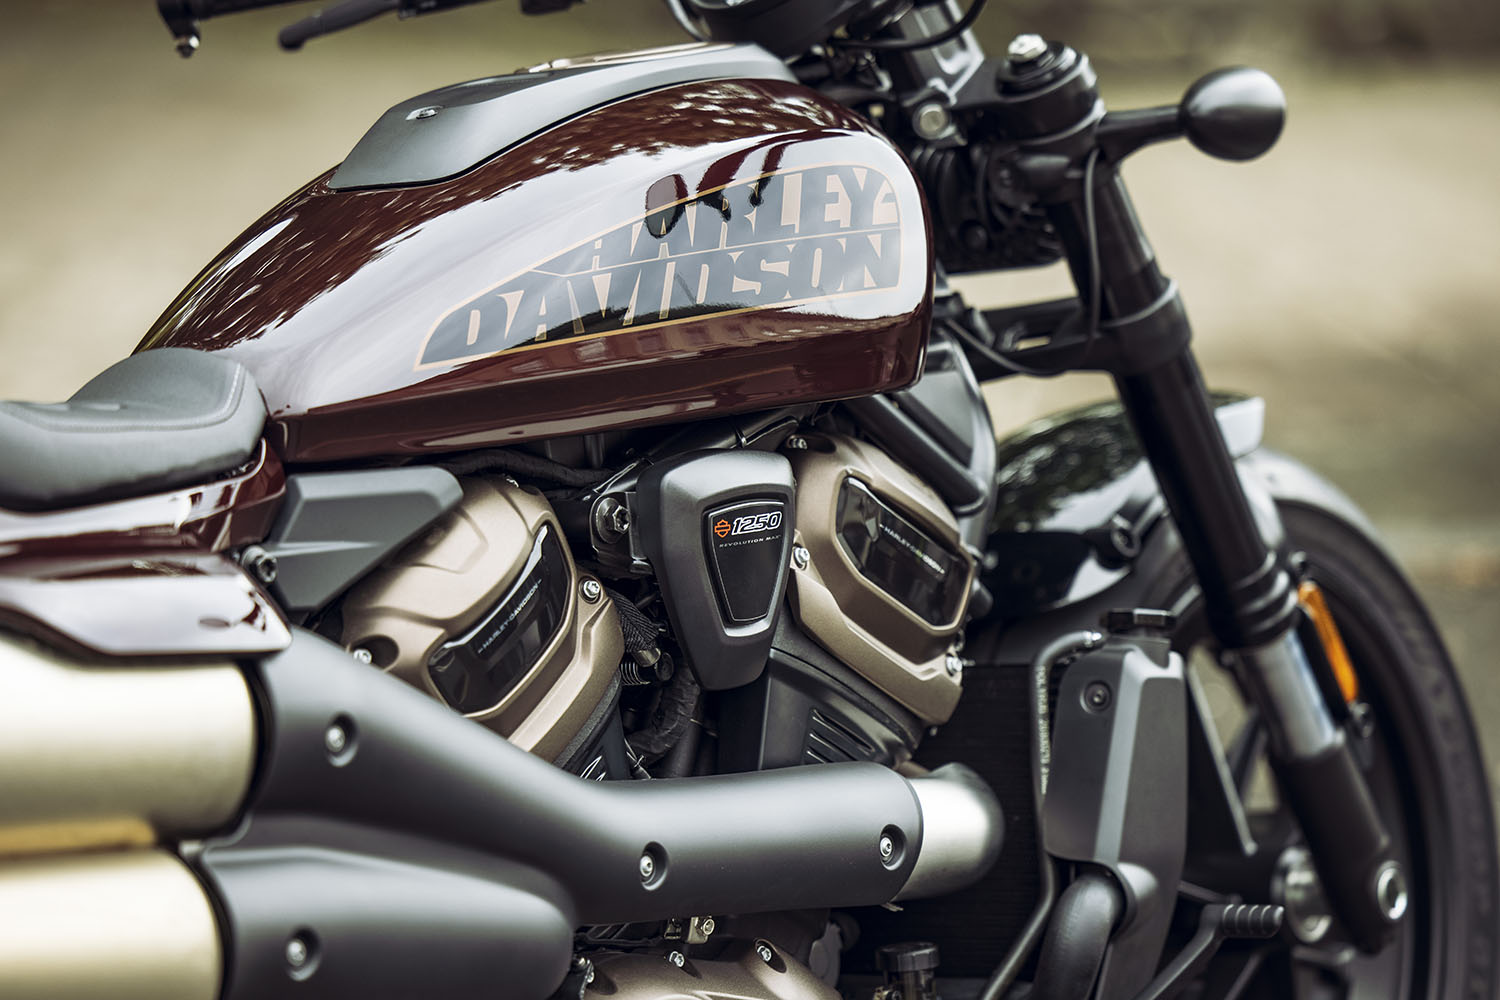 2021 Harley Davidson Sportster S First Look Review Rider Magazine